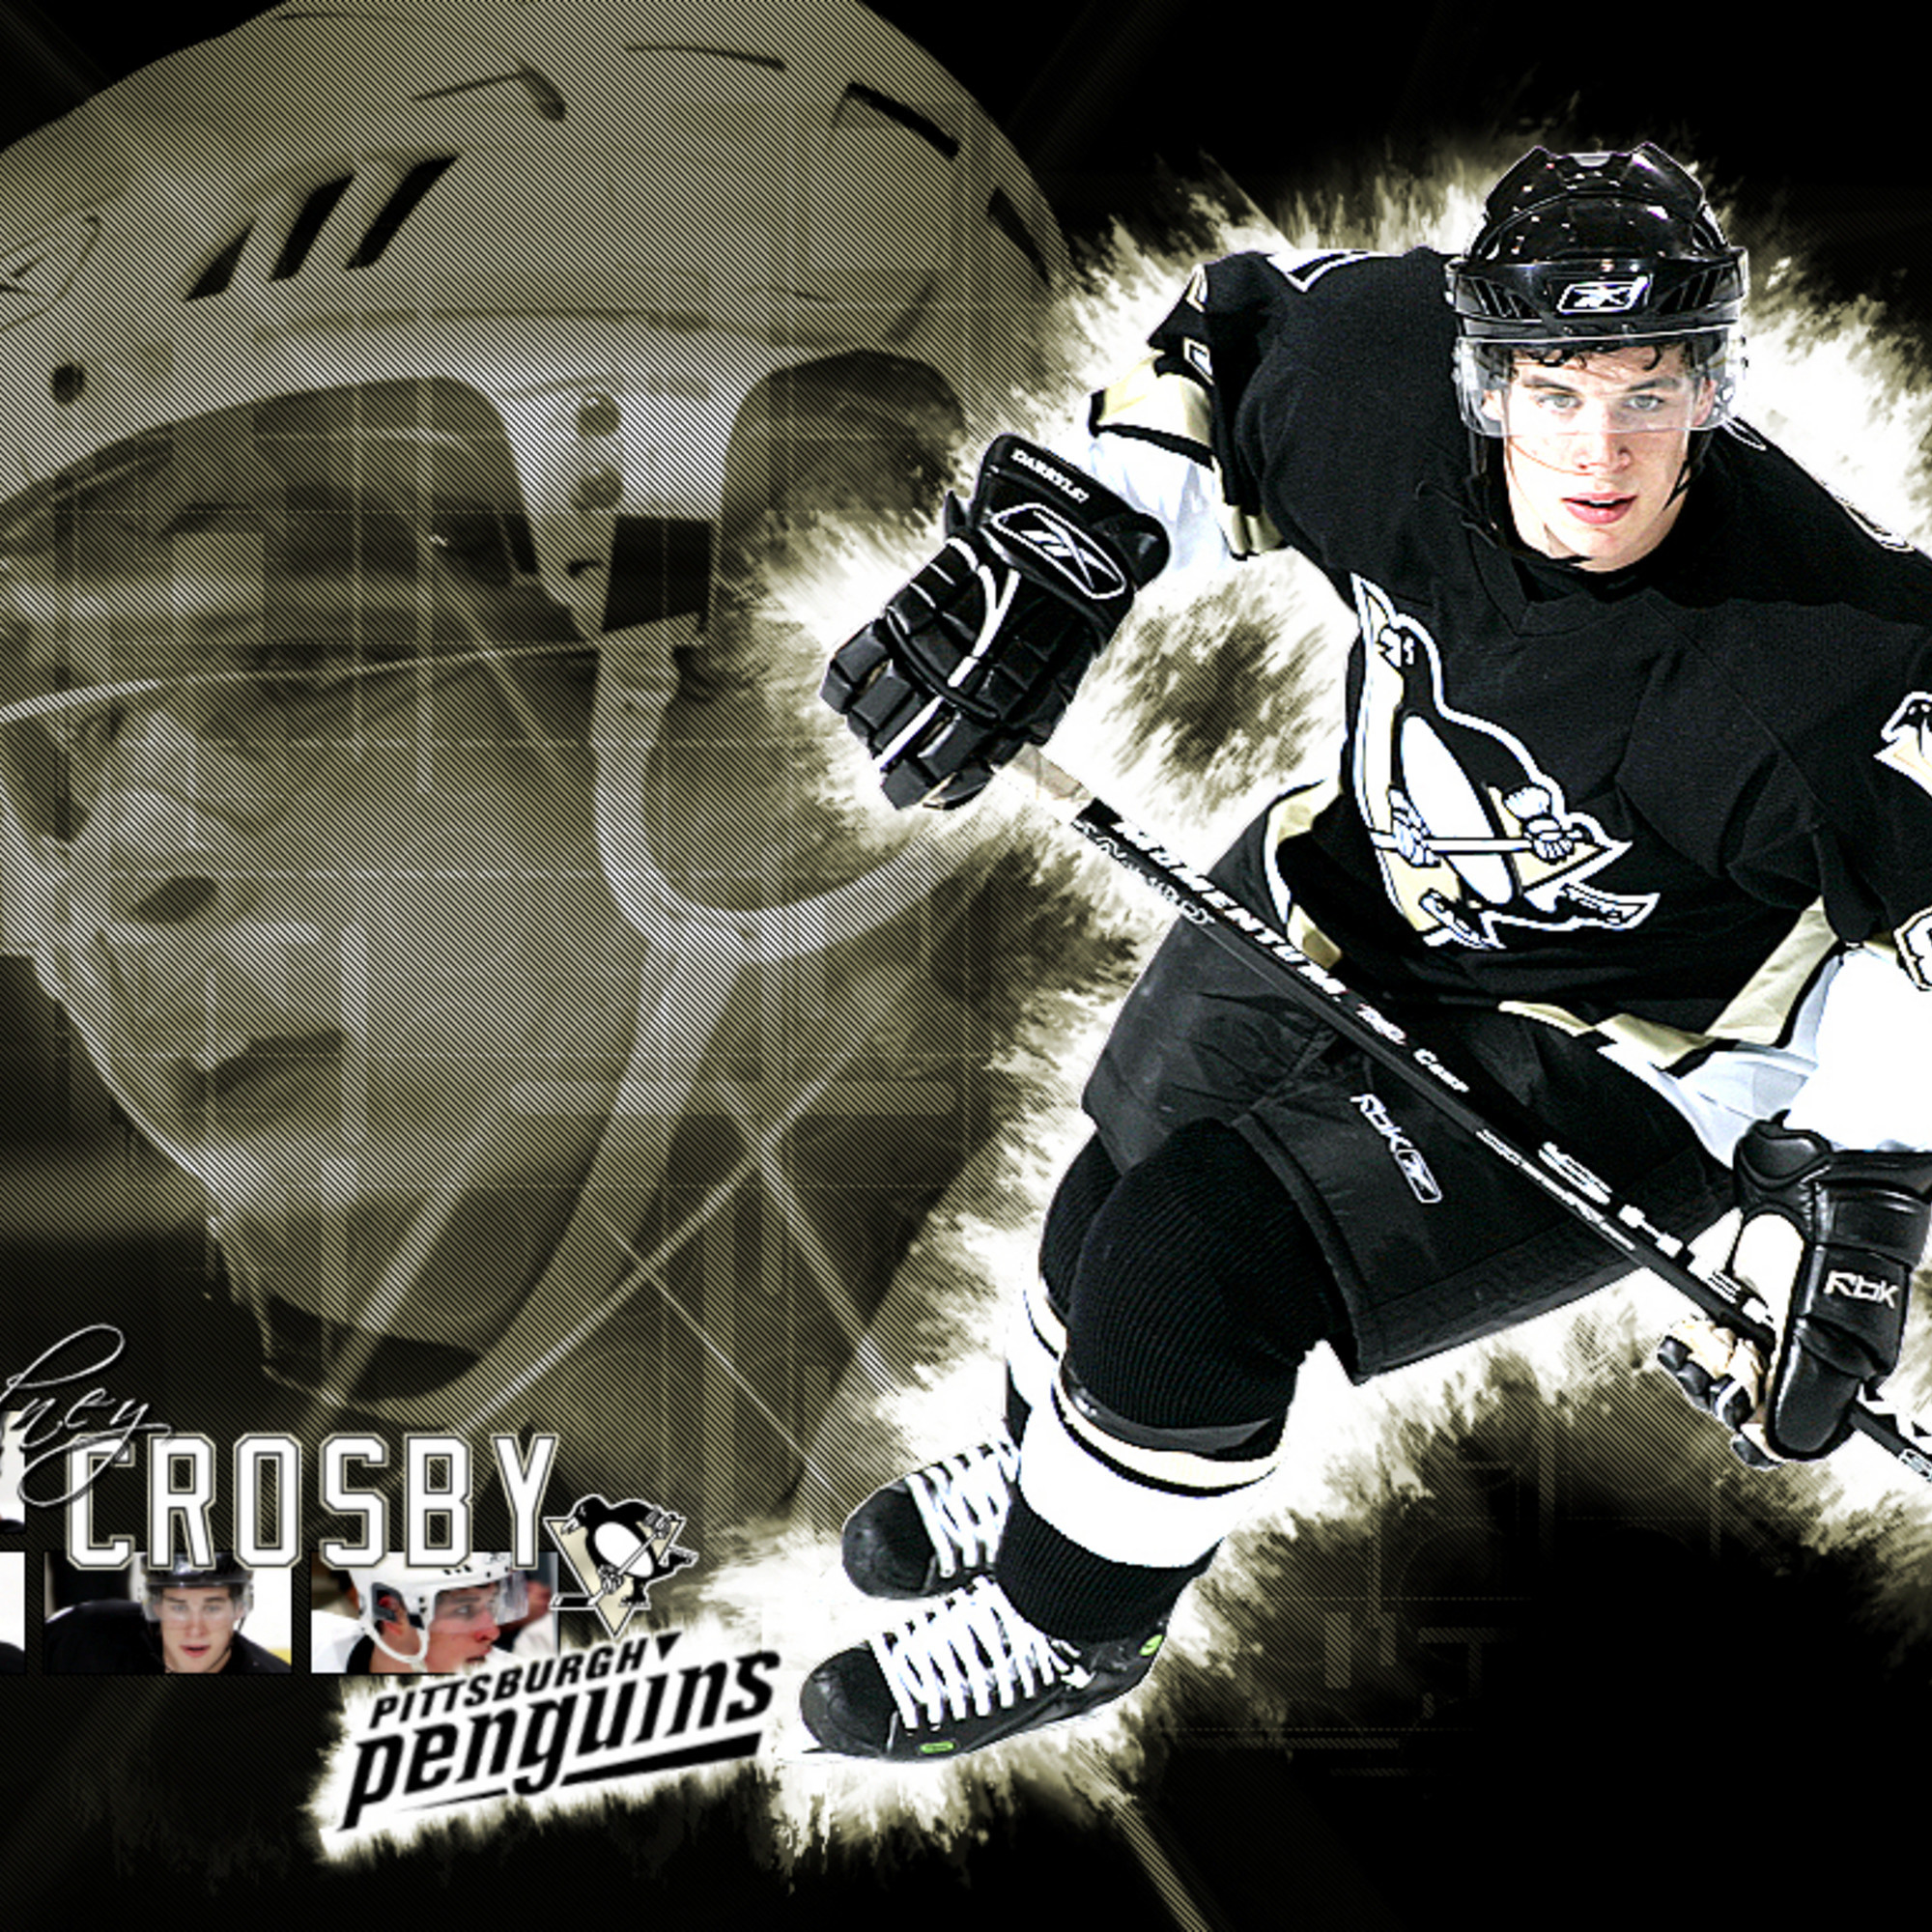  Sidney Crosby wallpapers and images   wallpapers pictures photos